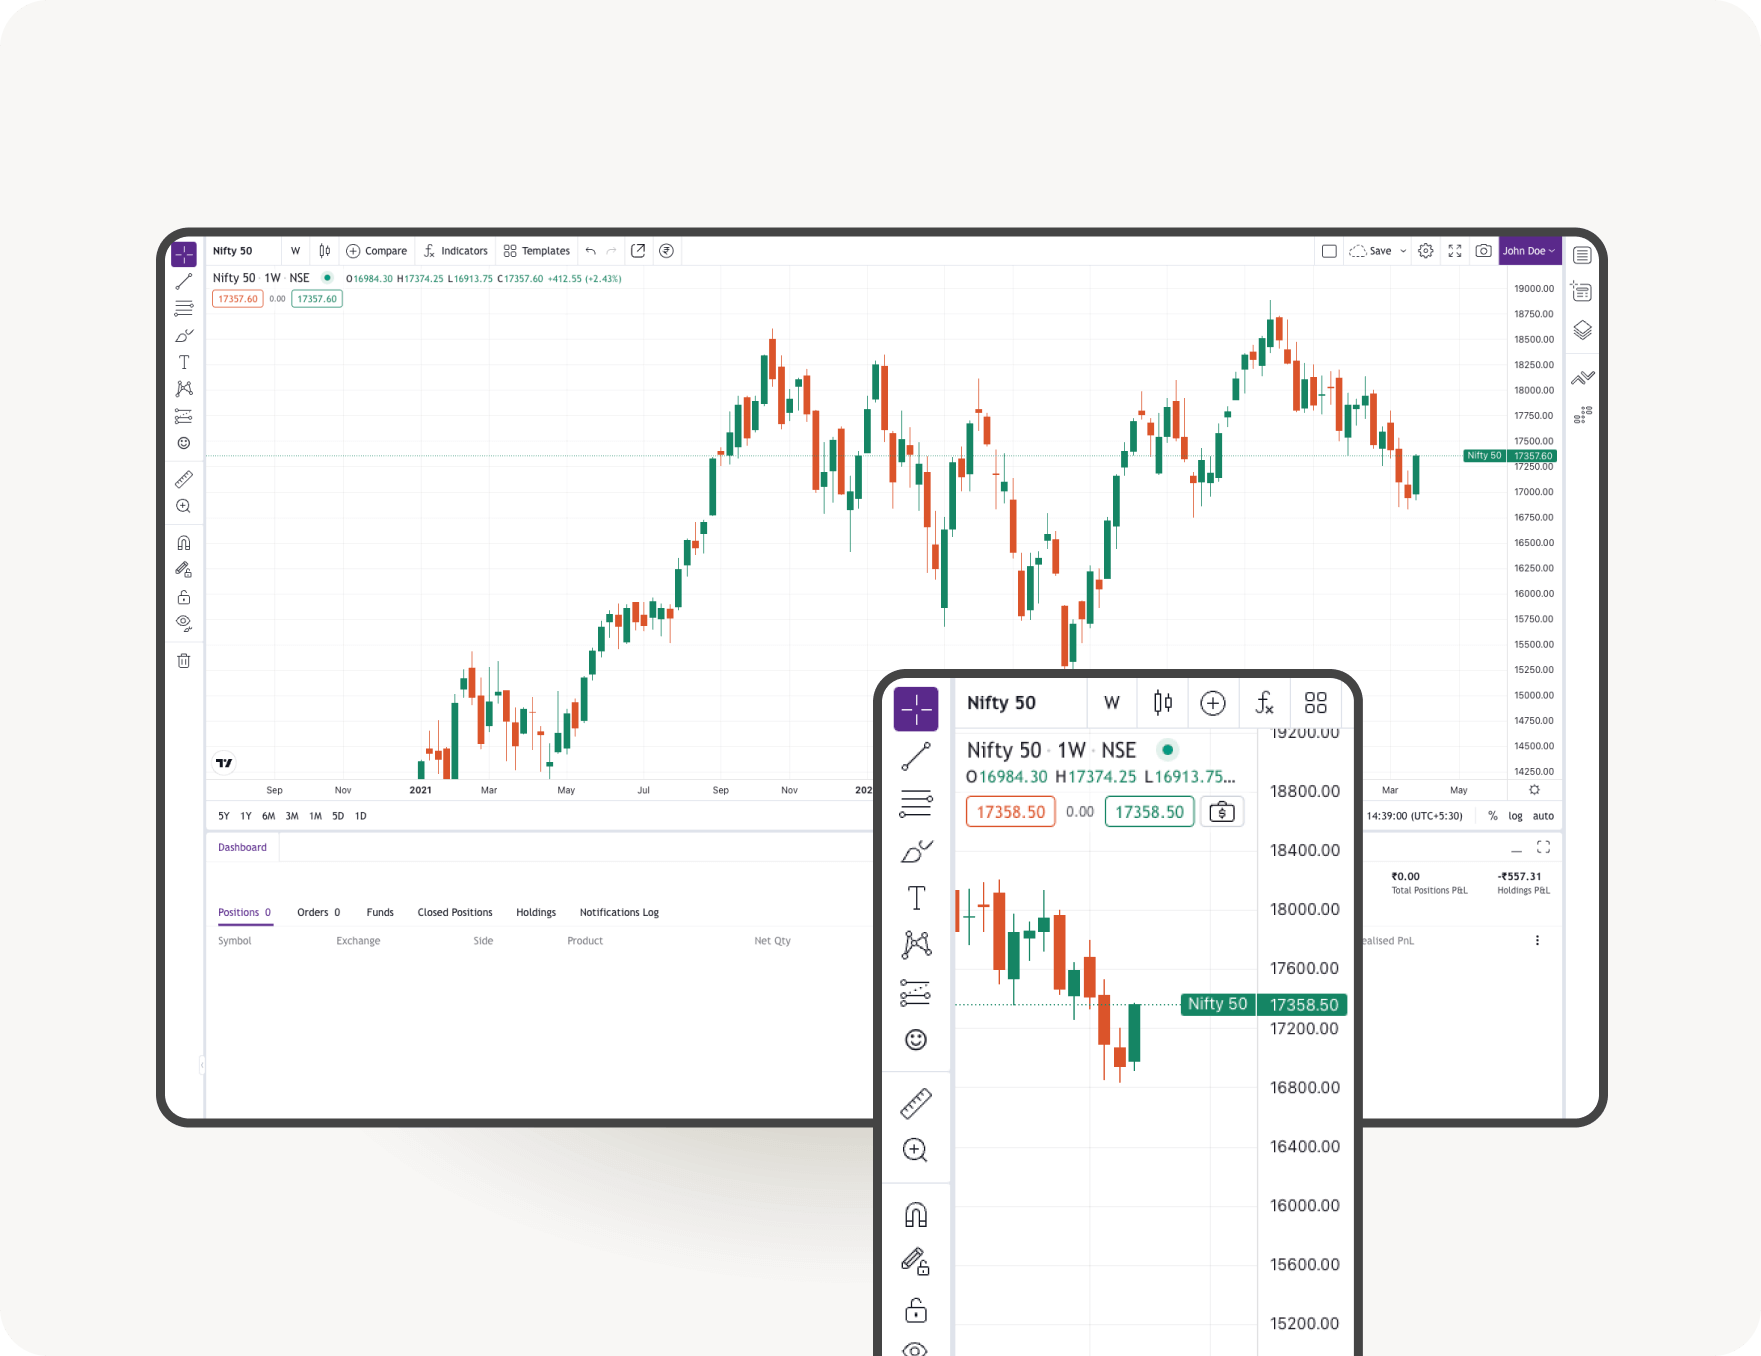 a trading platform for daytrading. The image is showing a trading platform for stocks and a graph showing the day stock average. Also showing the mobile phone app version. 